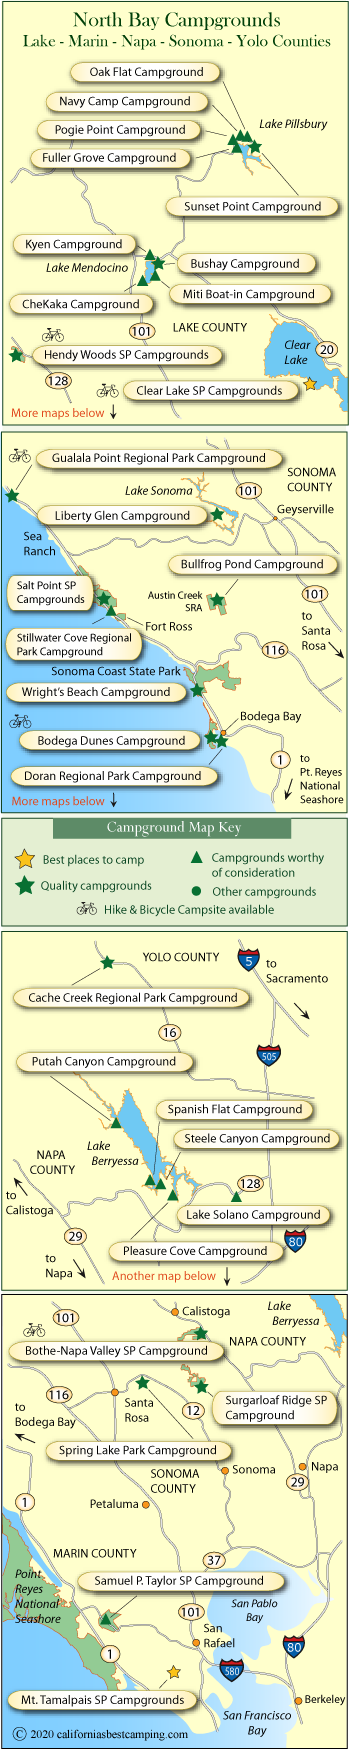 map of campground locations around Sonoma, Napa, Marin, and Yolo counties